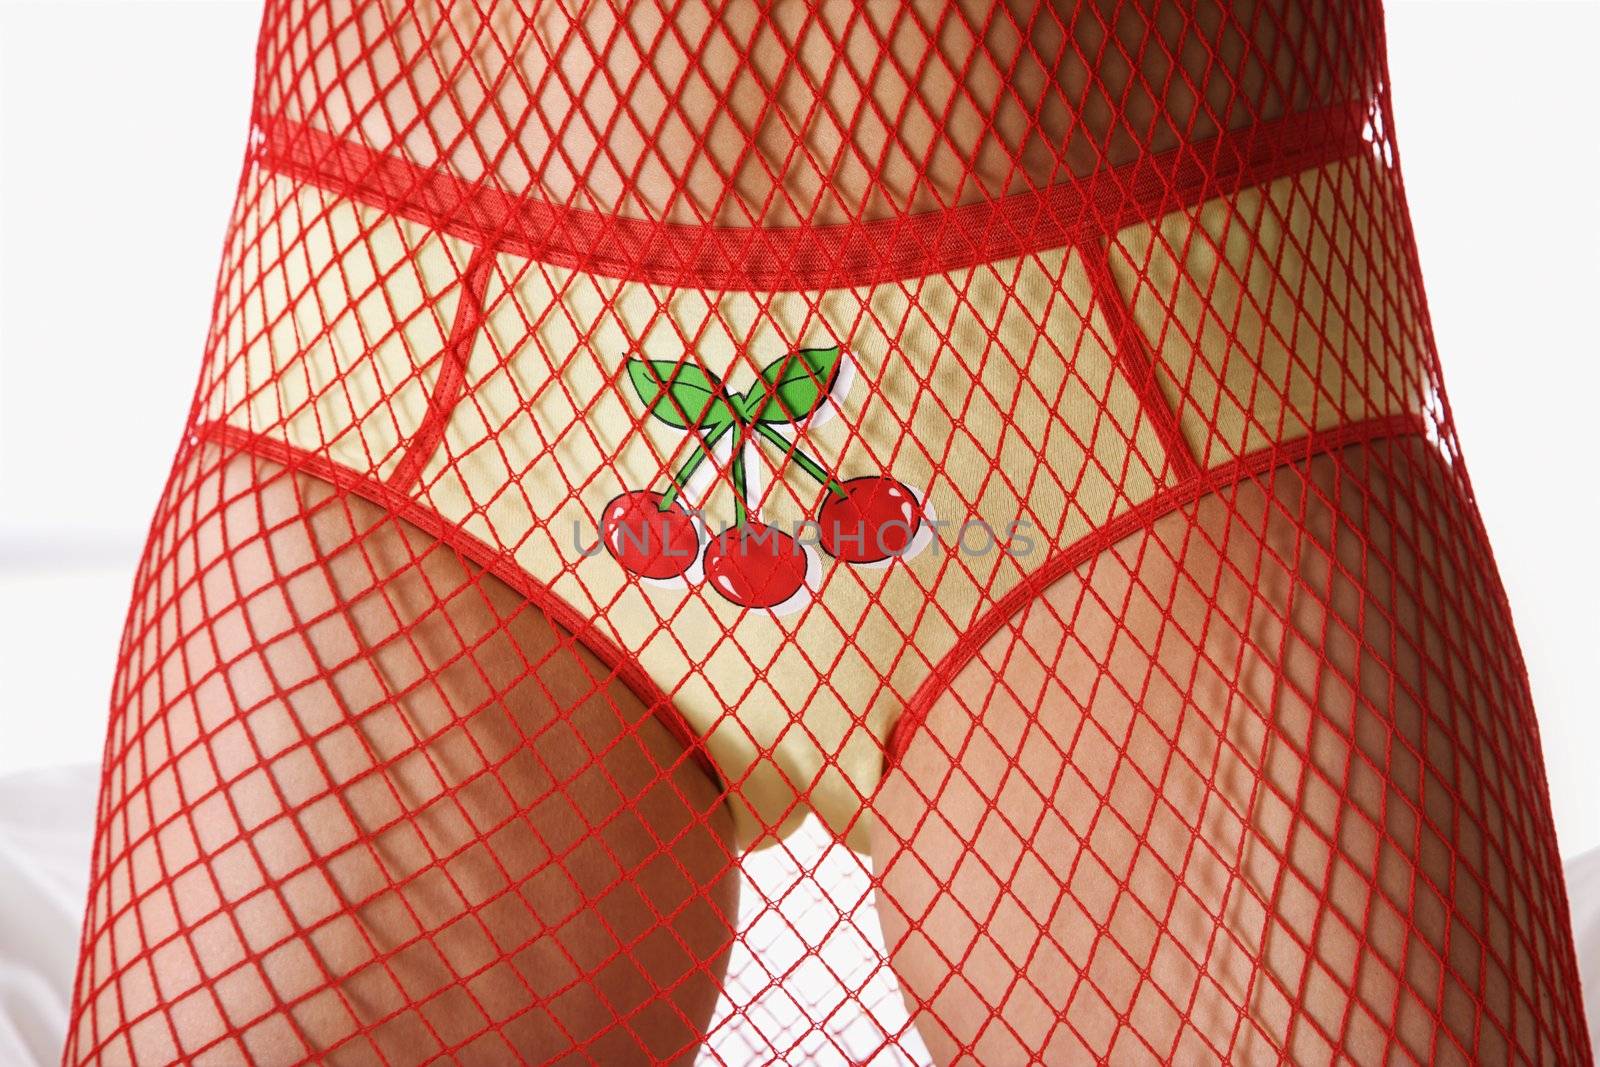 Caucasian woman wearing briefs with cherries and mesh covering body.